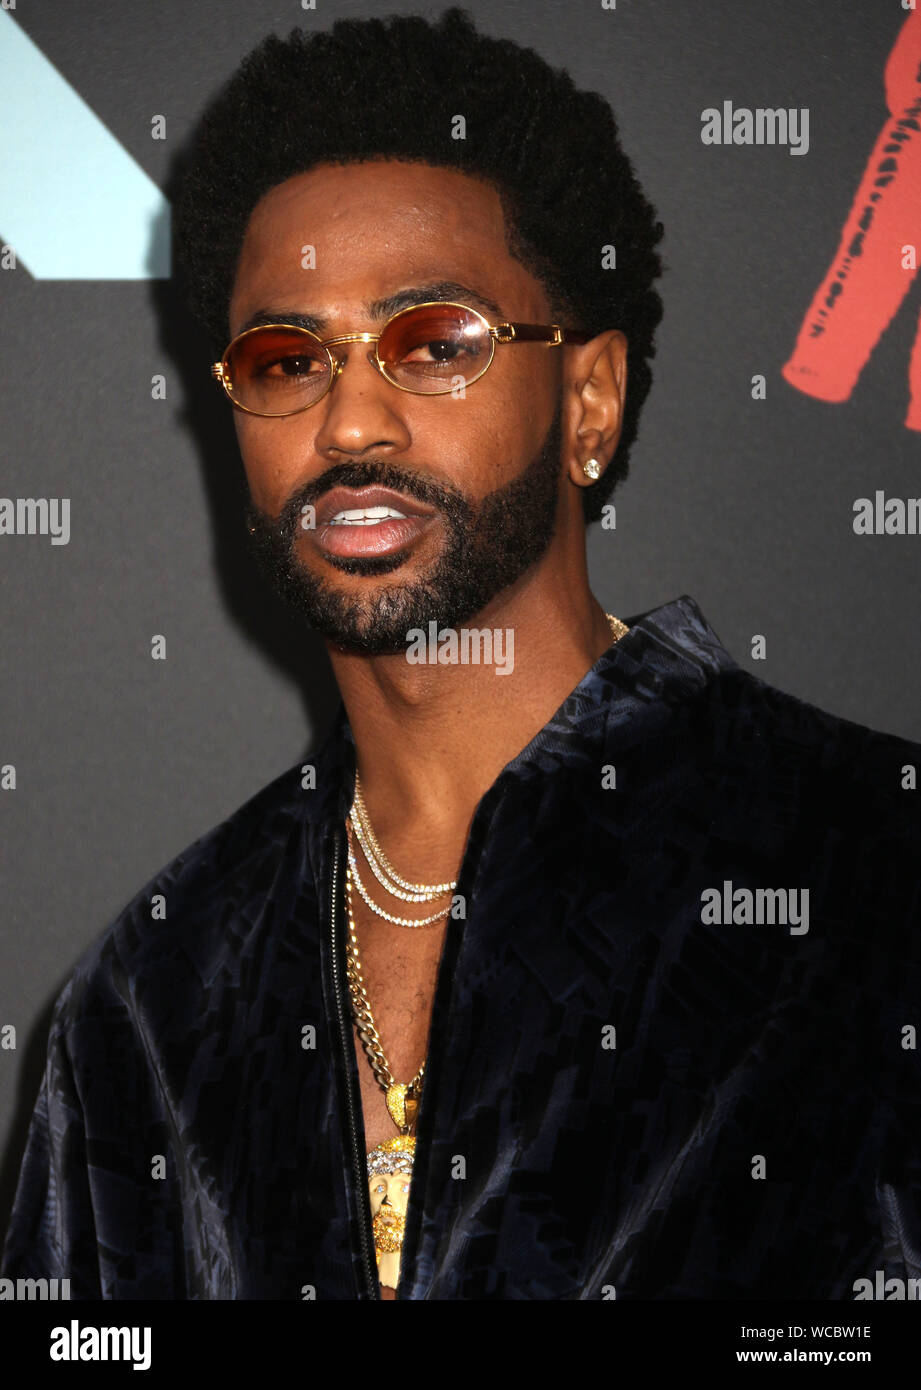 August 26, 2019, Newark, New York, USA: Singer BIG SEAN attends the 2019 MTV VMAs red carpet arrivals held at the Prudential Center. (Credit Image: © Nancy Kaszerman/ZUMA Wire) Stock Photo